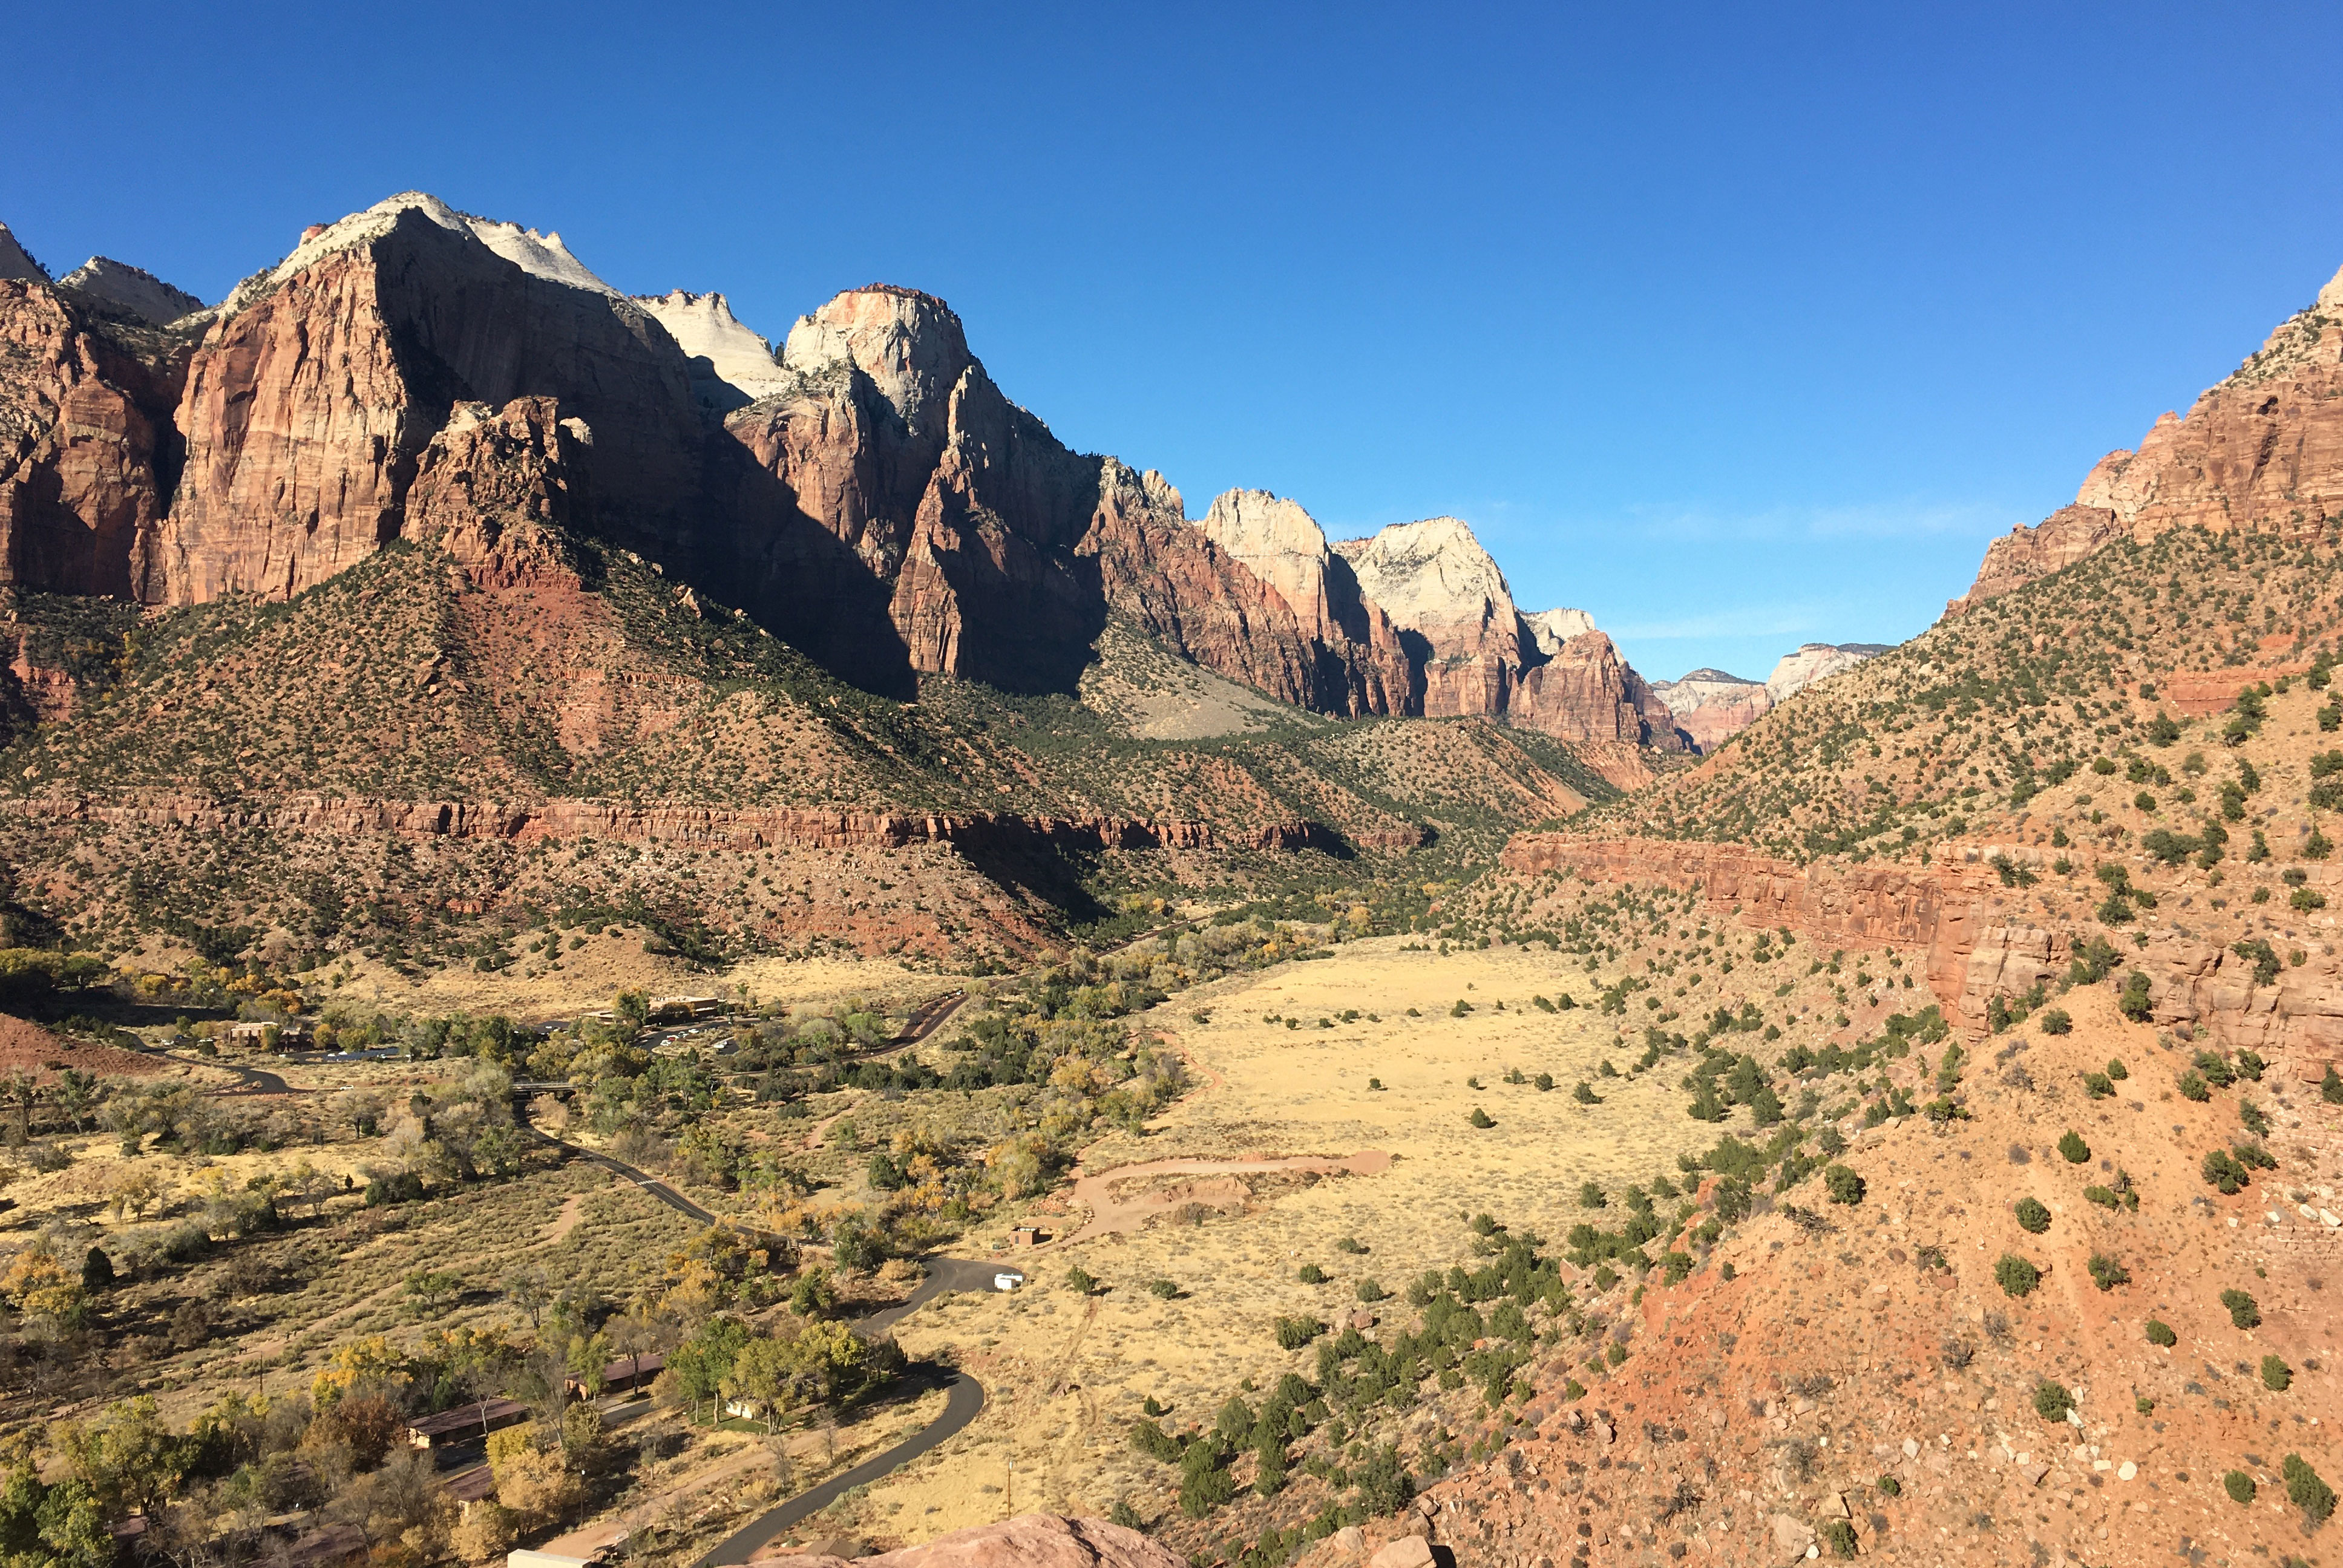 View from Watchman Trail